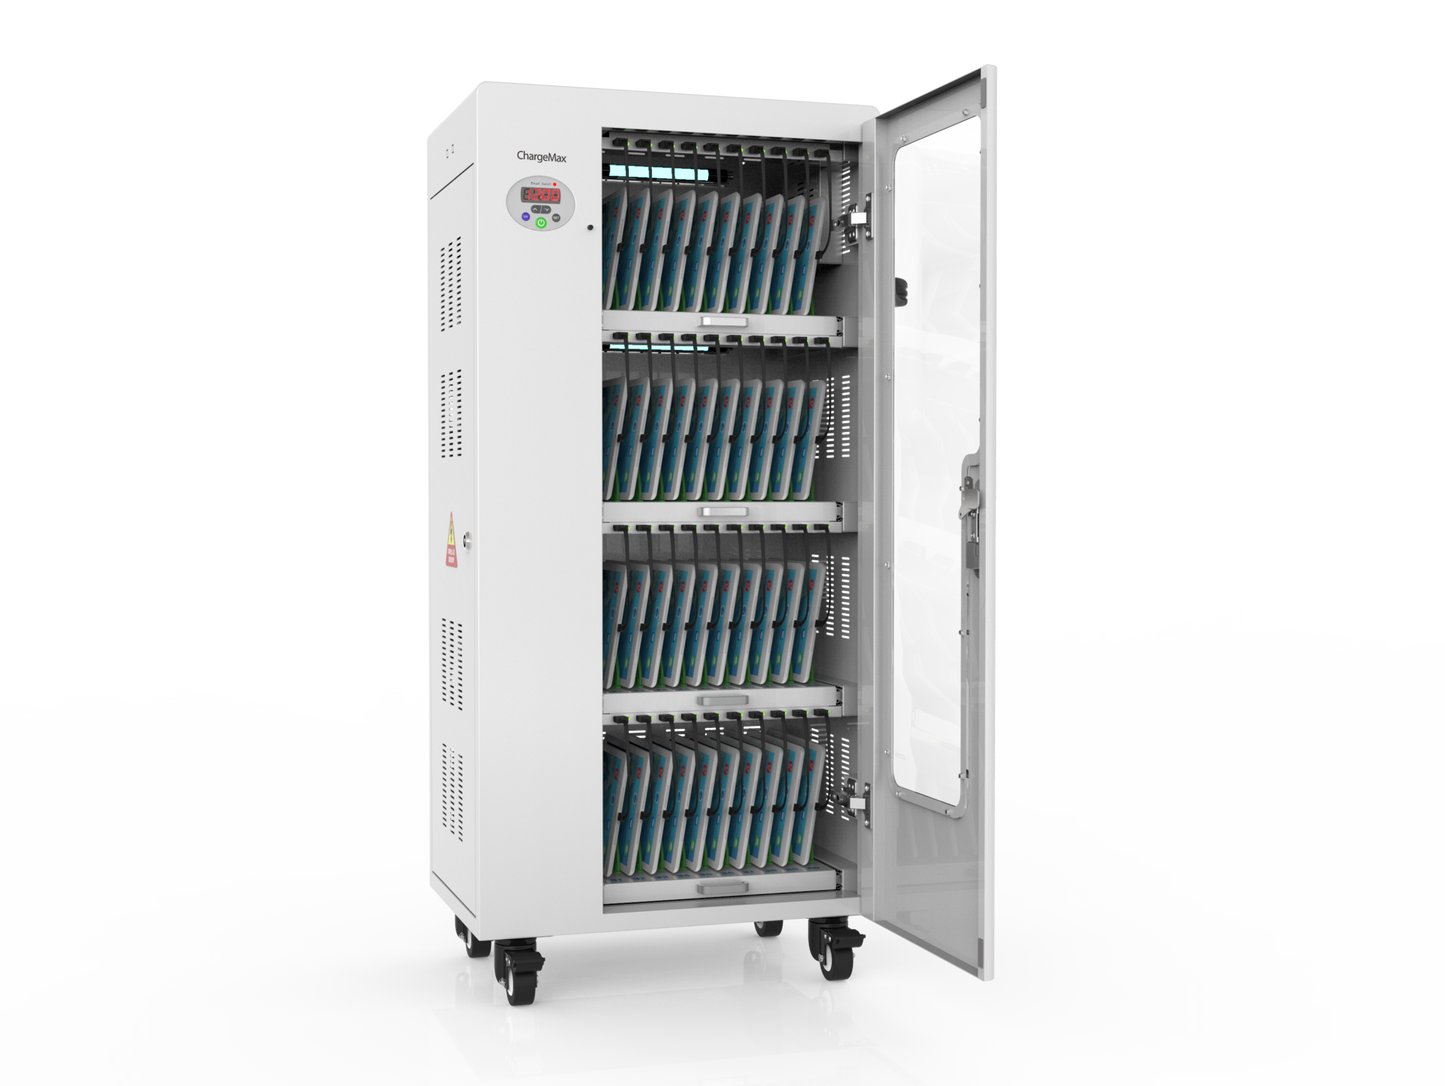 ChargeMax Disinfection Charging Cabinet - 40 bays, 4 Level (CT-40BU) - CT-40BU - 4 Level / 40 Bays. 5 minutes UVC Disinfection with digital timer; UV Disinfection System inside the cabinet removes germs and bacteria